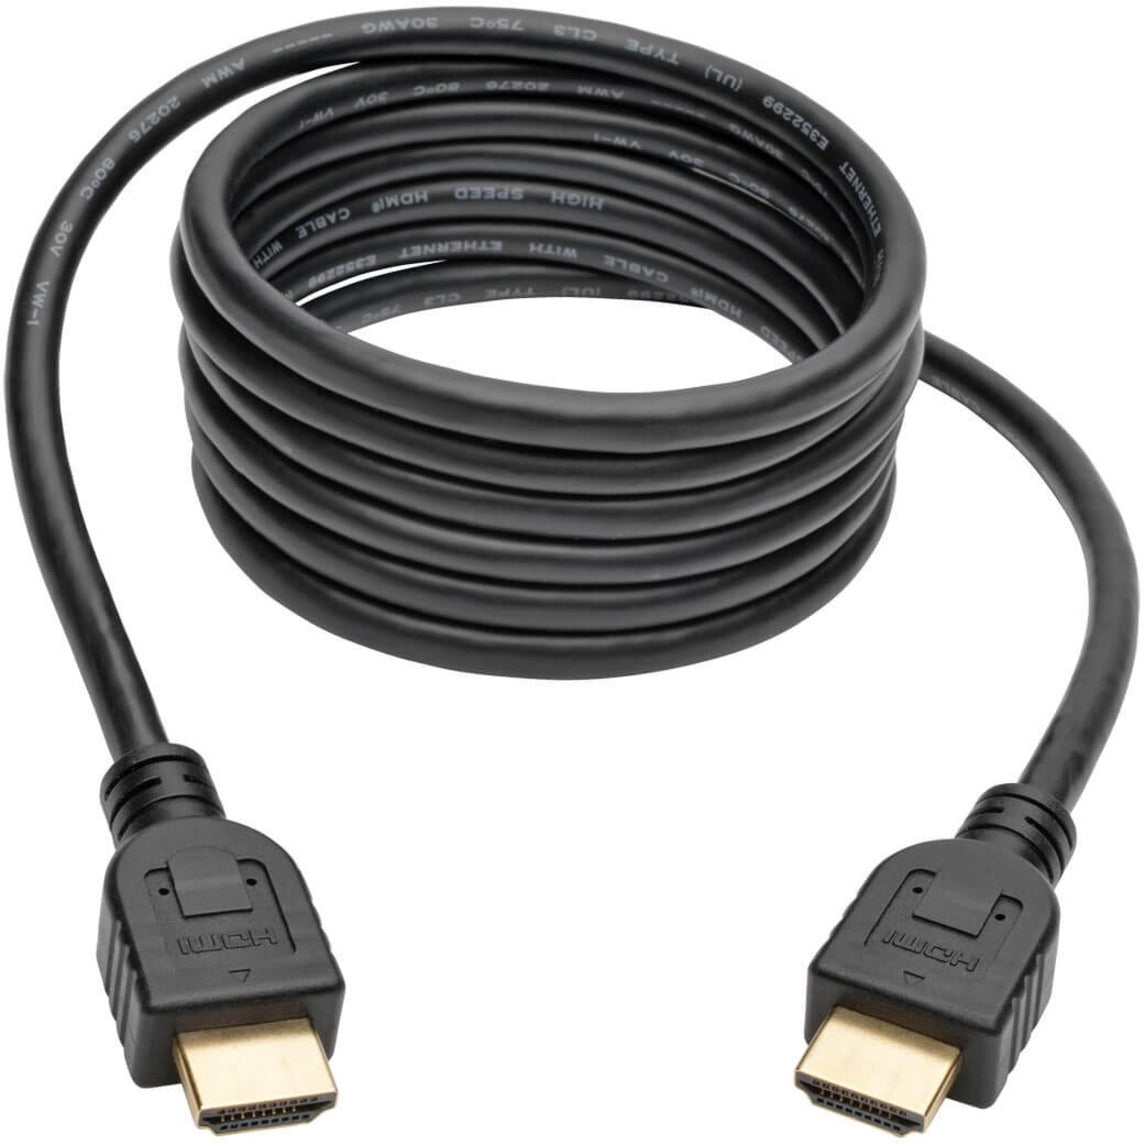 Tripp Lite by Eaton High-Speed HDMI Cable with Ethernet and Digital Video with Audio, UHD 4K x 2K, I (P569-016-CL3)